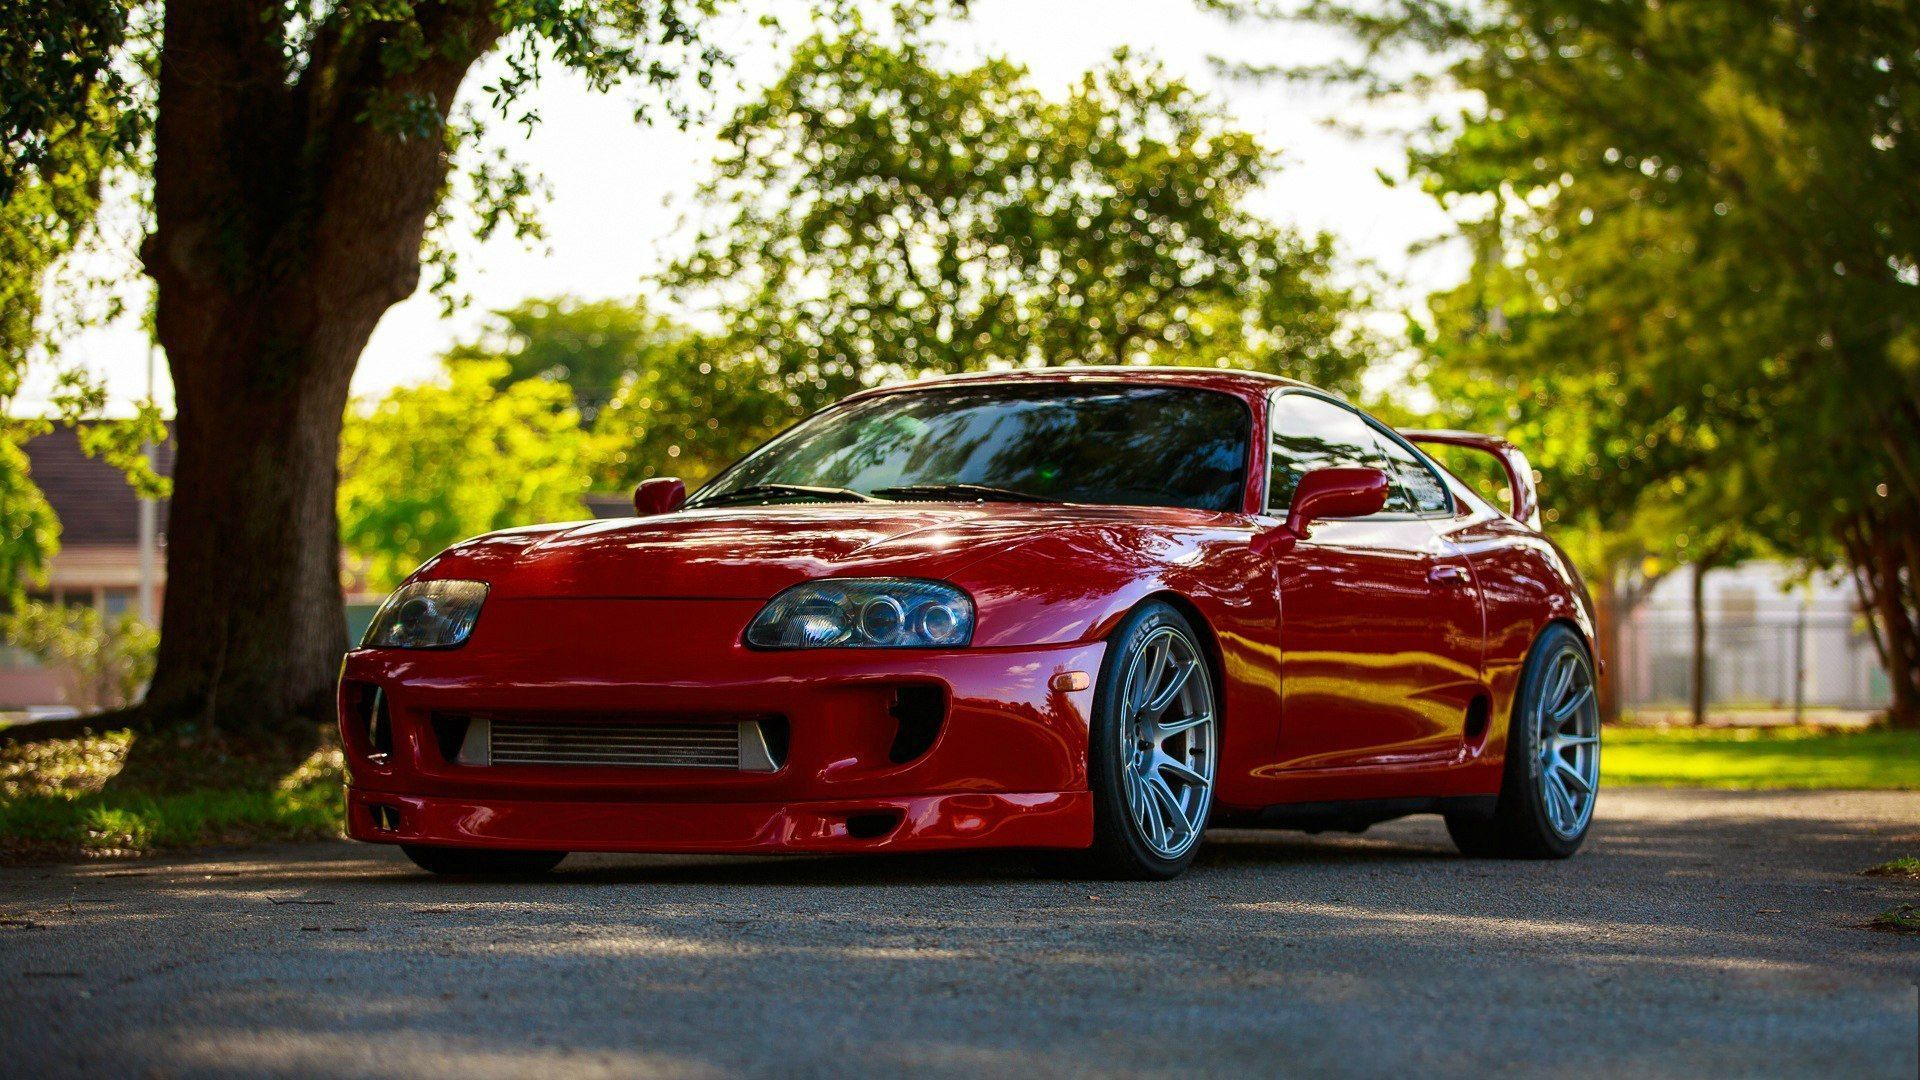 Red Toyota Supra wallpapers and images - wallpapers, pictures, photos